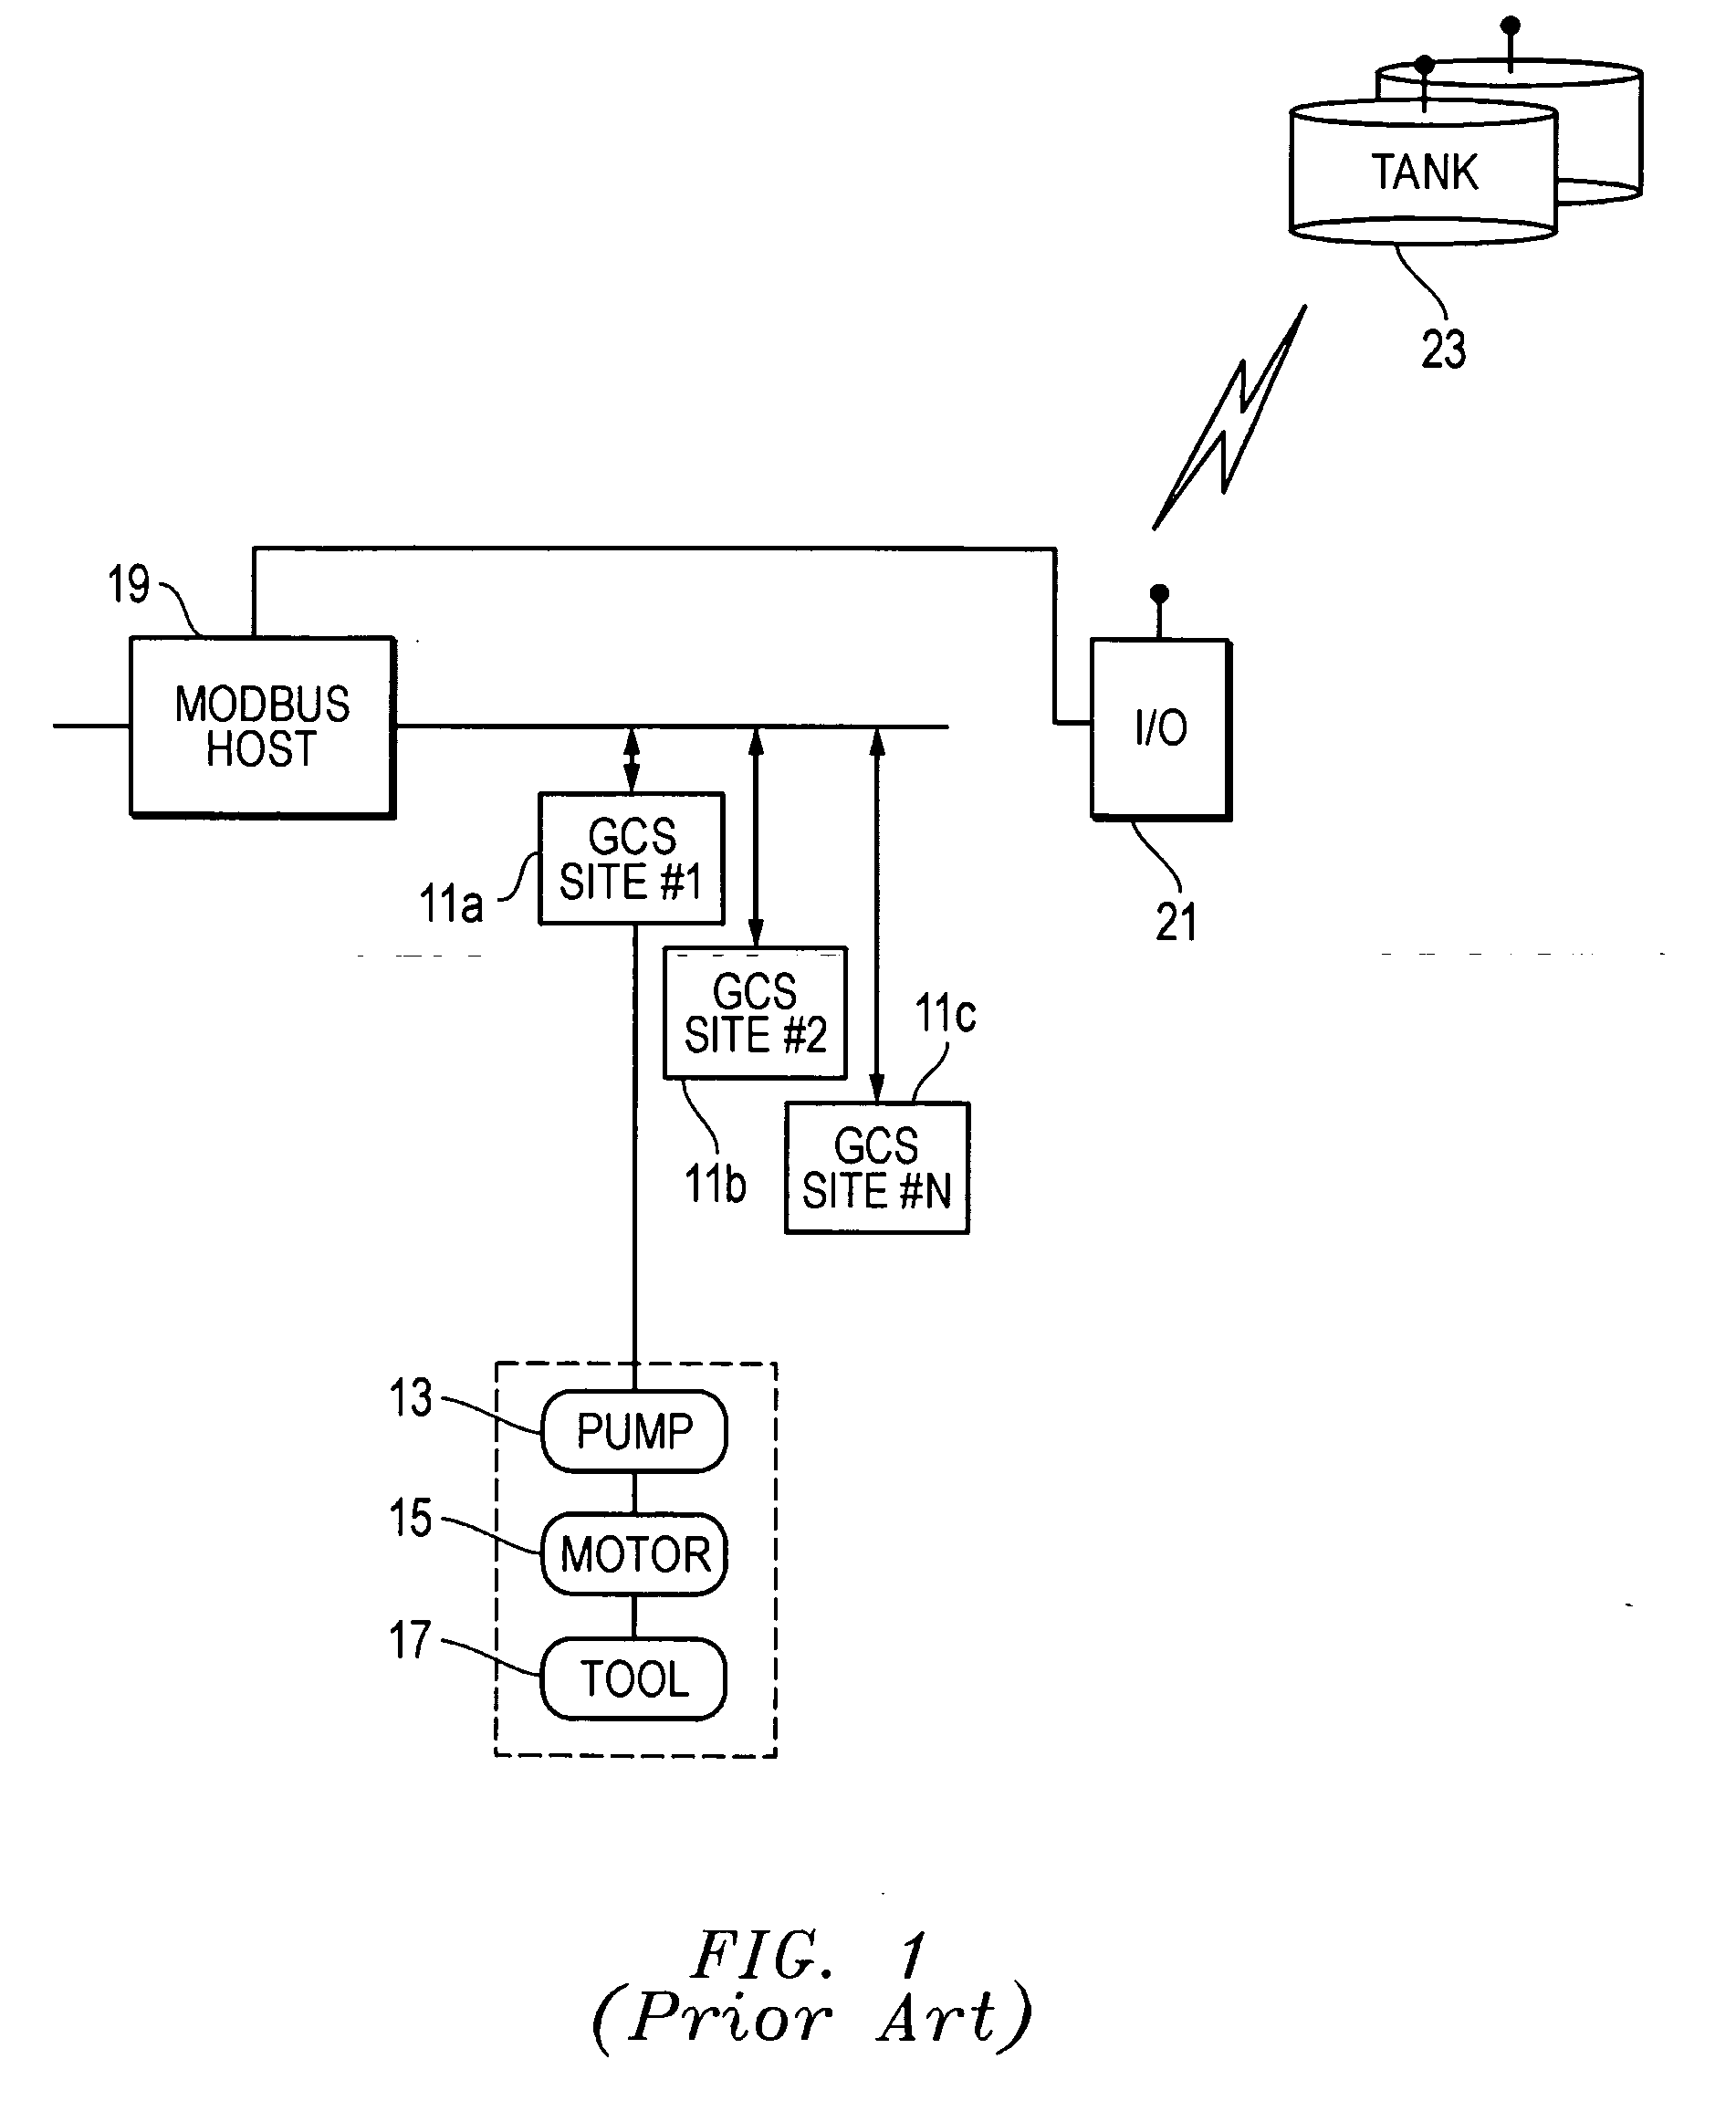 System, method, and apparatus for command and control of remote instrumentation